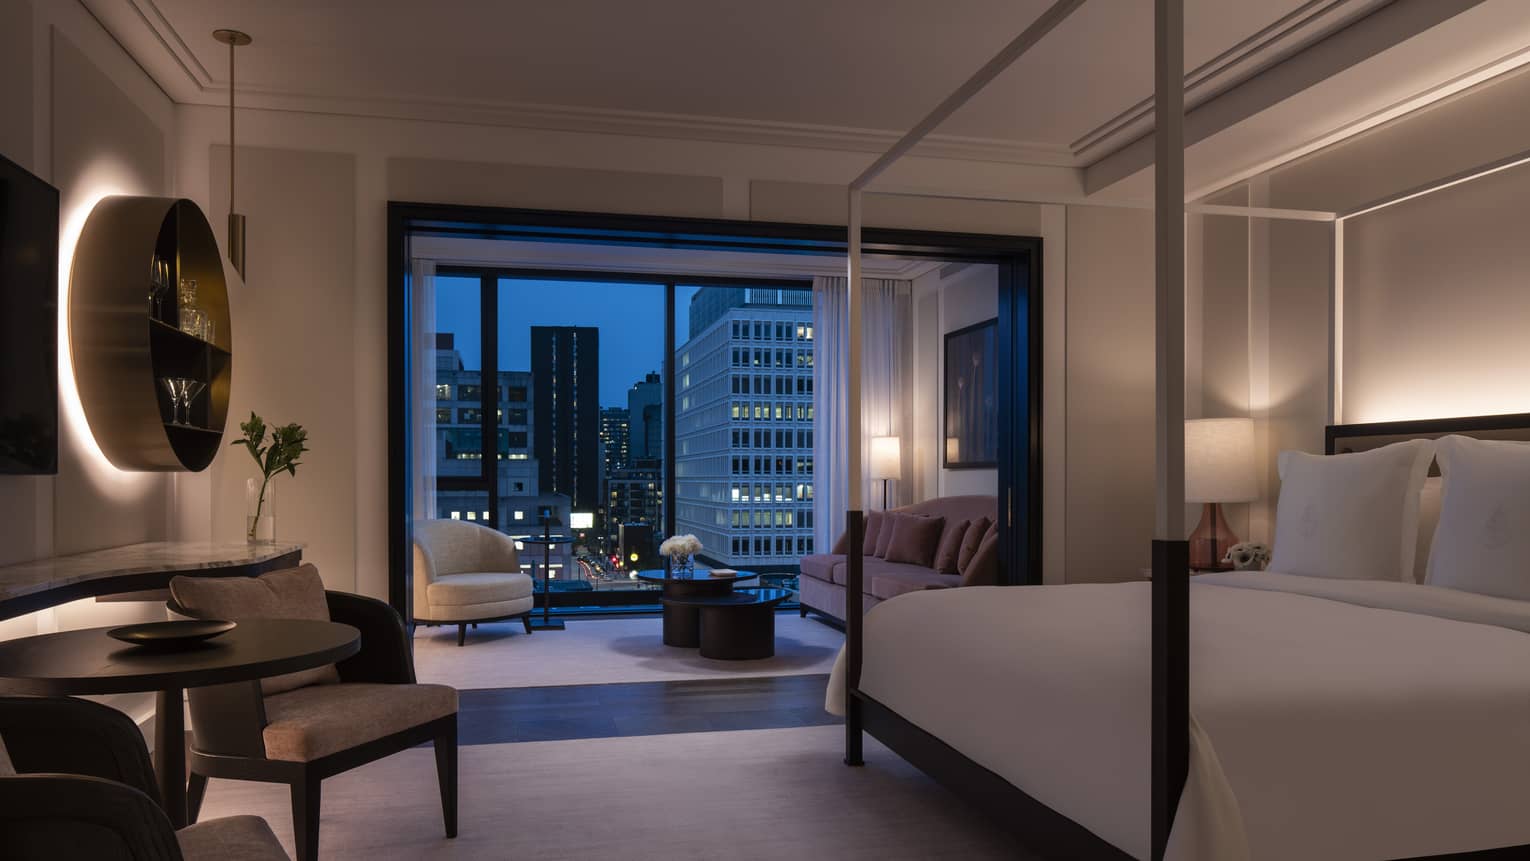 Four Seasons Executive Suite, dimly lit with four-poster modern bed and evening patio views